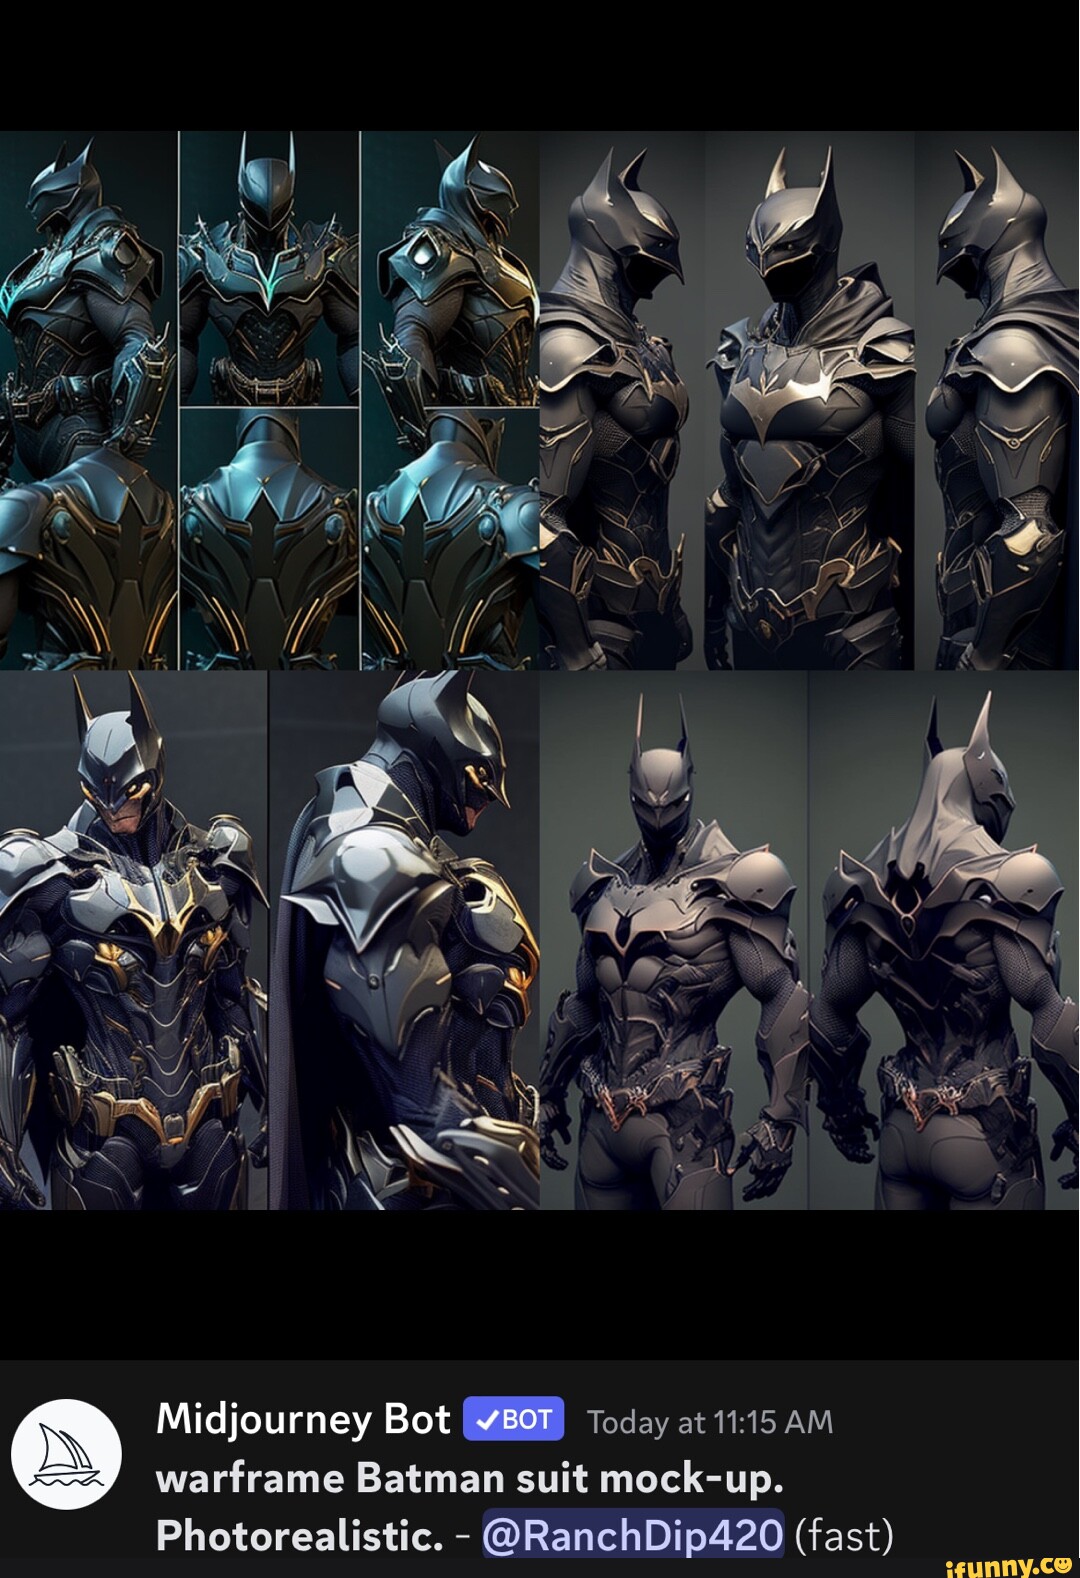 4 ) I ff Midjourney Bot Today at AM Photorealistic. - @RanchDip420 (fast)  wartrame Batman suit mock-up. - iFunny